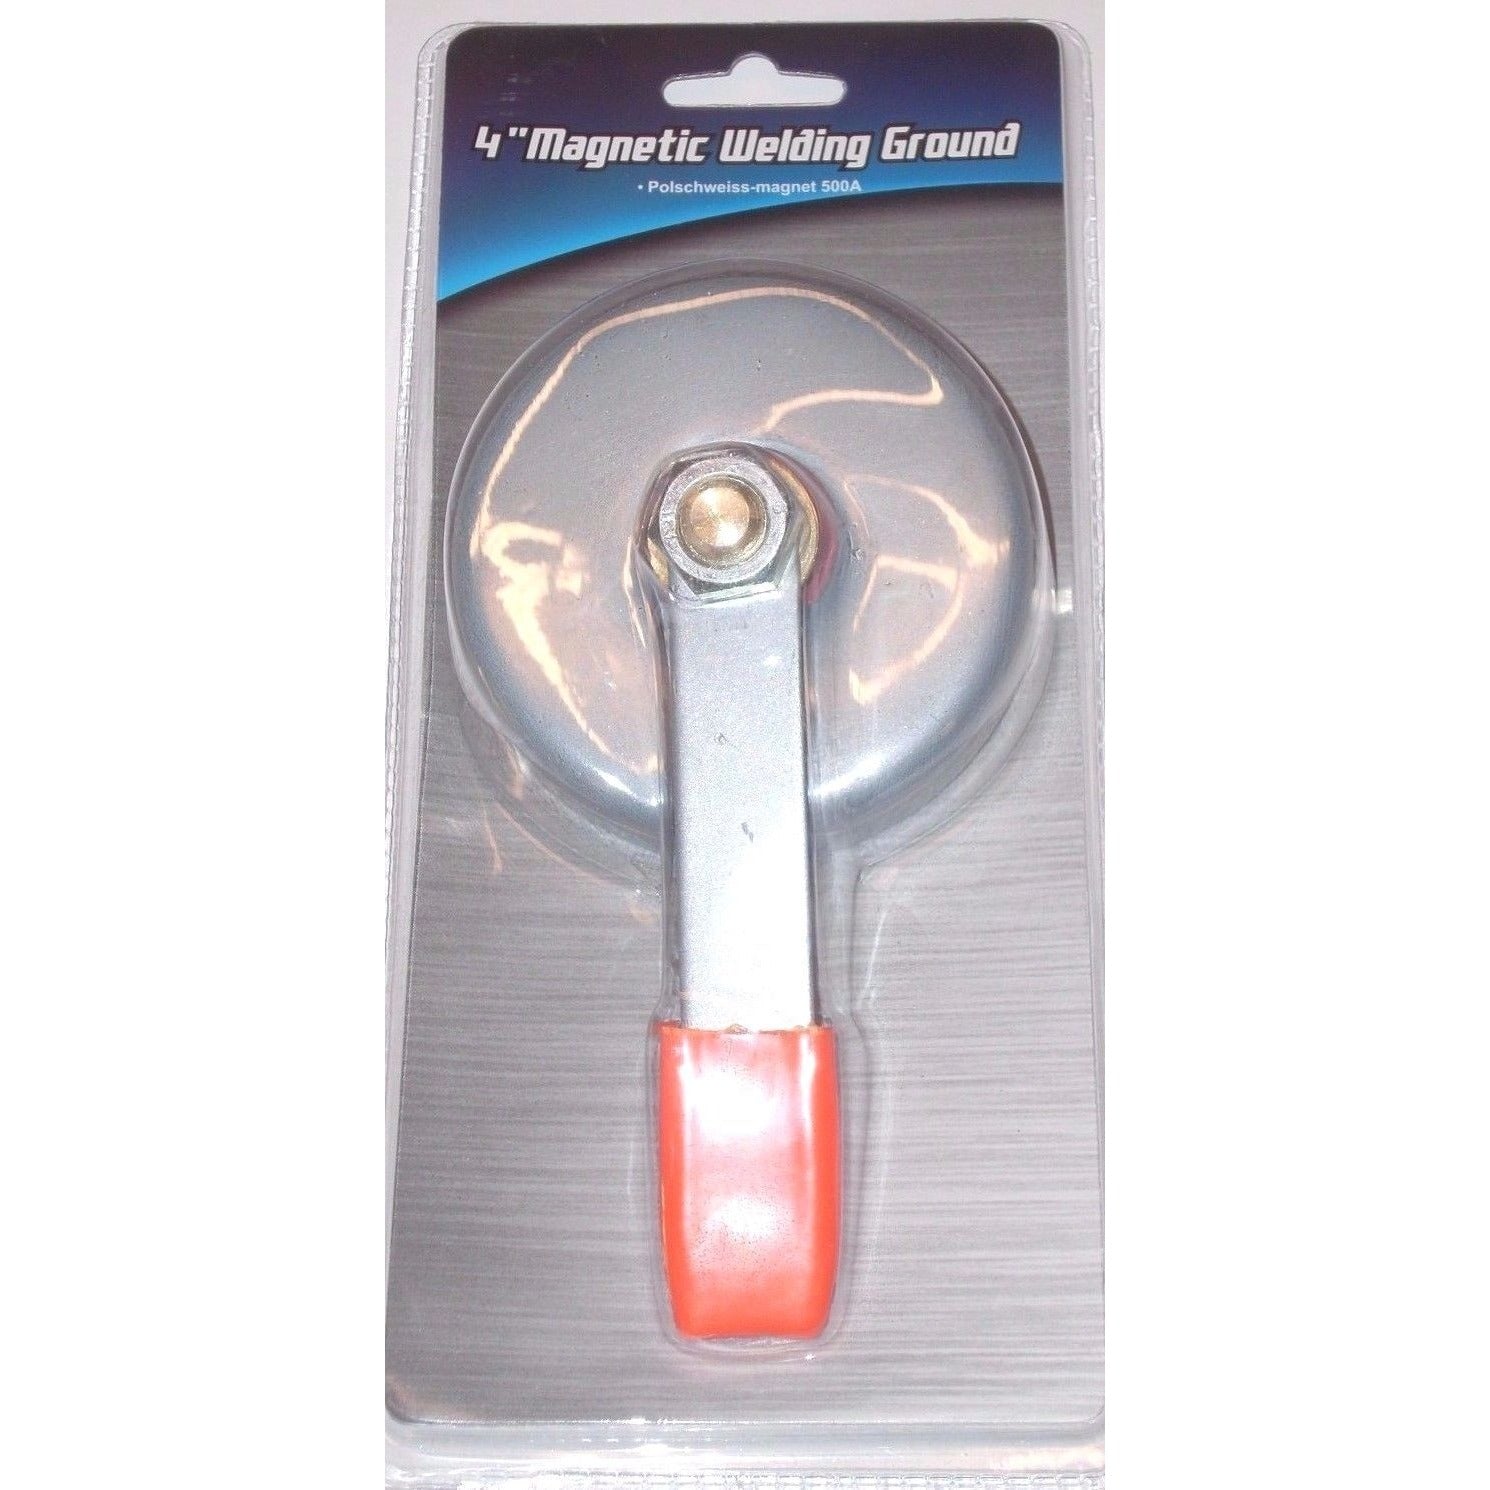 4" Magnetic Welding Ground Clamp w Lift Handle 500A Capacity 1/2" Stud Bolt - ATL Welding Supply